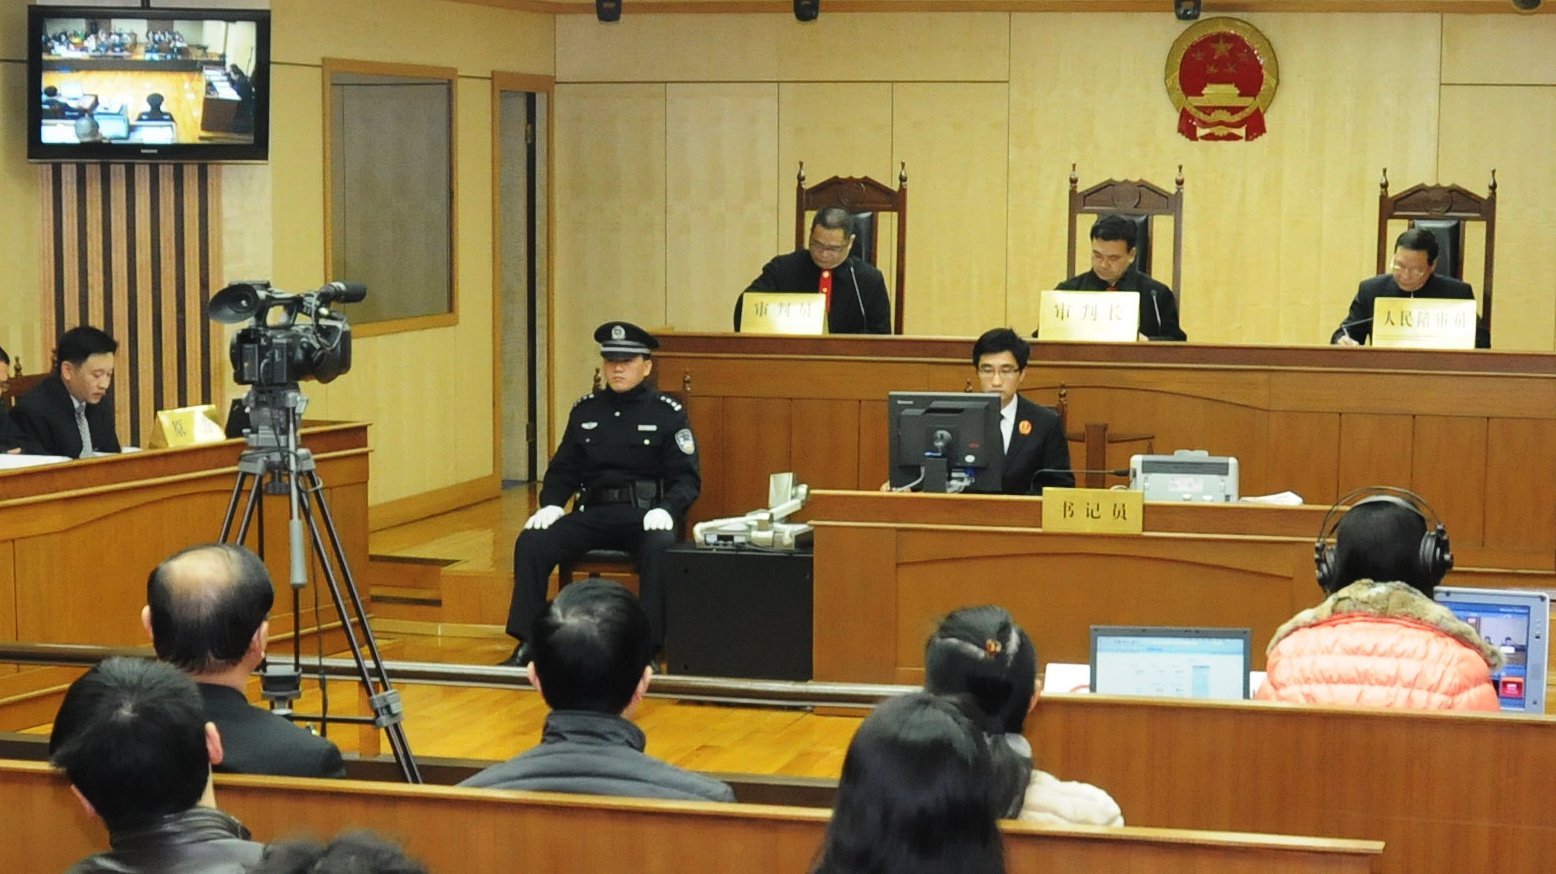 Chinese courtroom